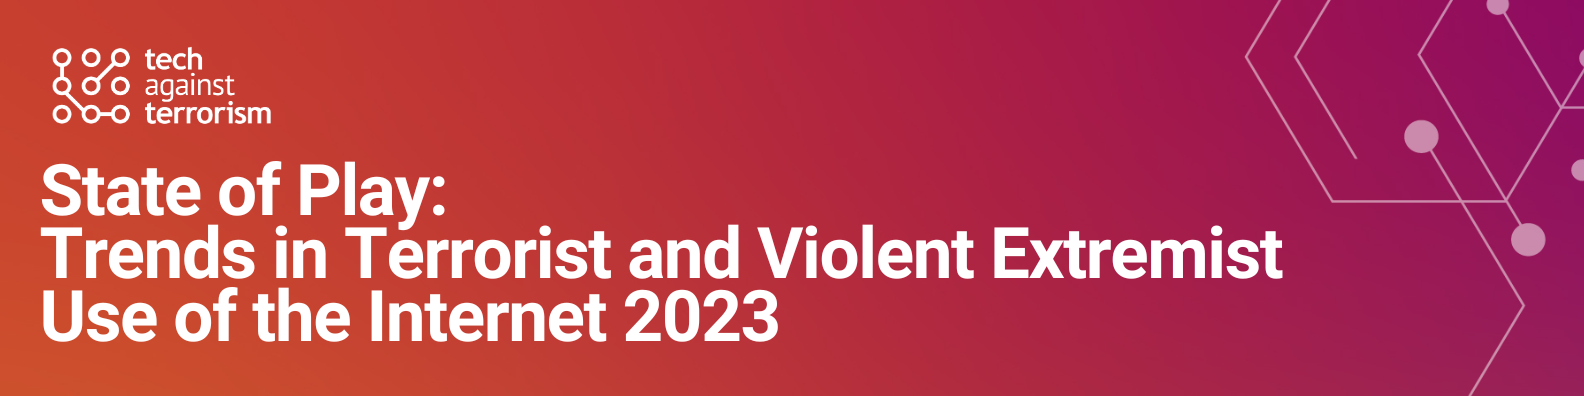 State of Play Trends in Terrorist and Violent Extremist Use of the Internet 2023